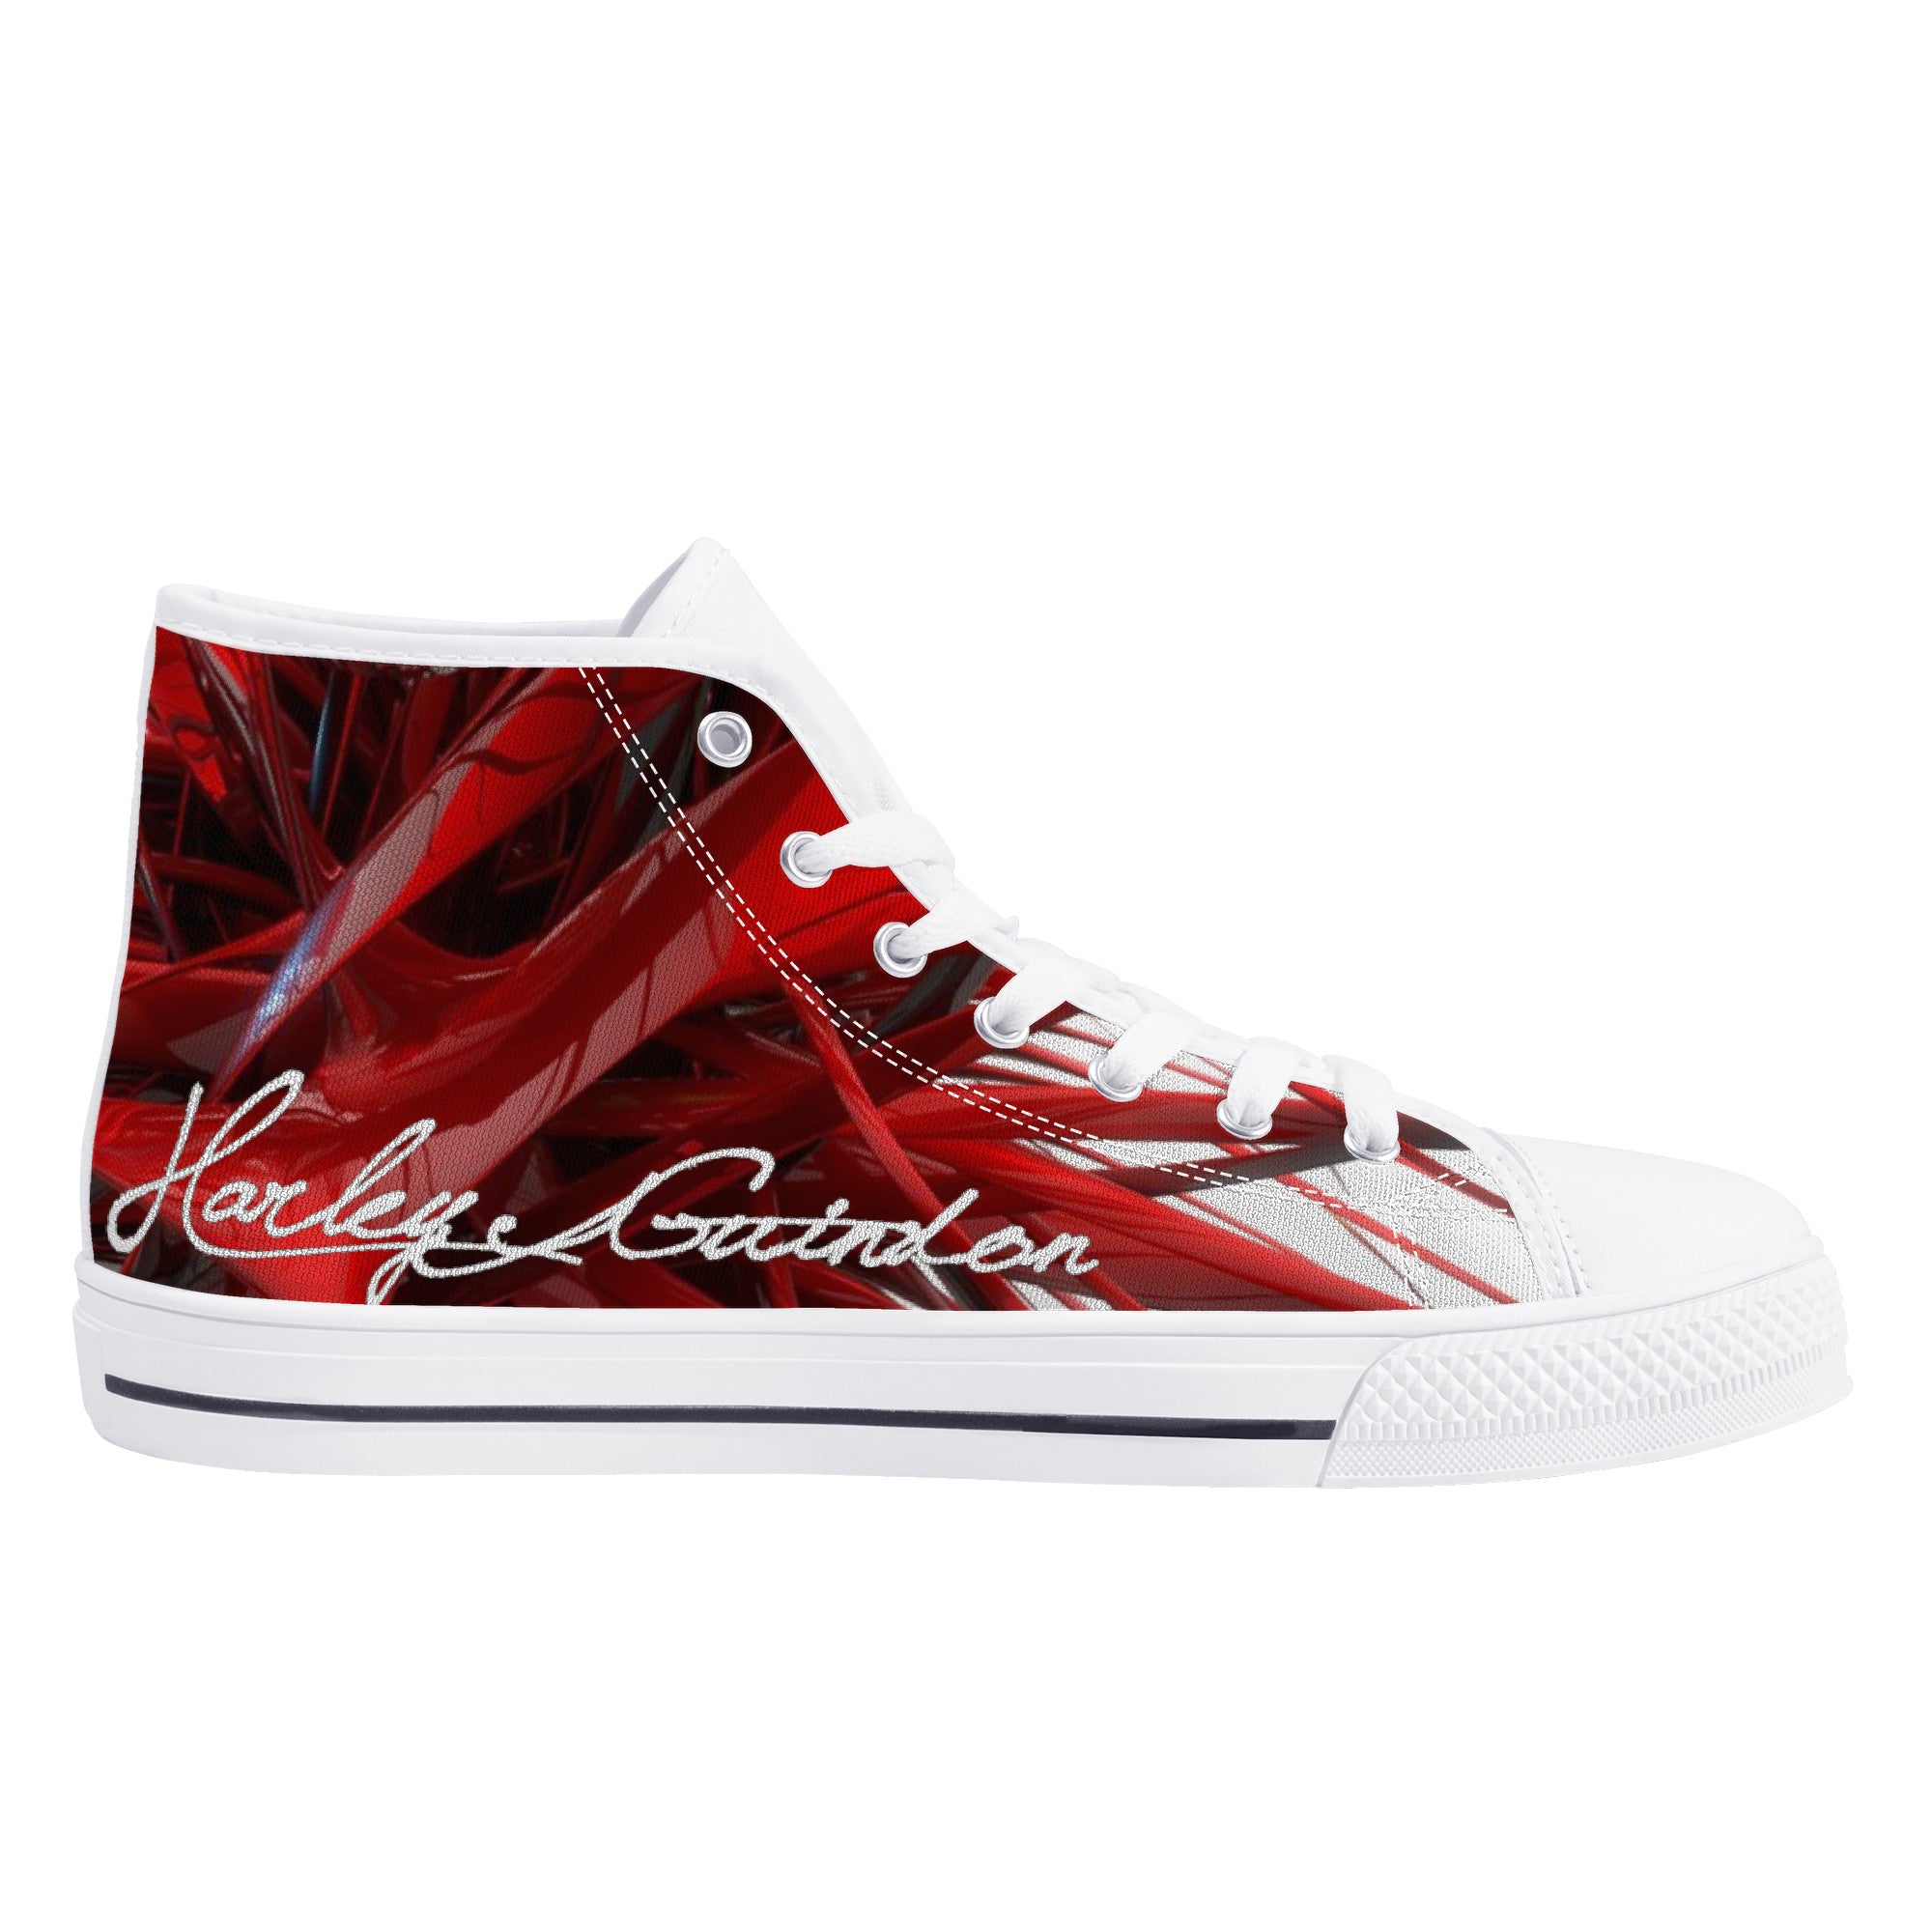 HG Signature Red Shoes | Custom Branded Company Shoes | Shoe Zero